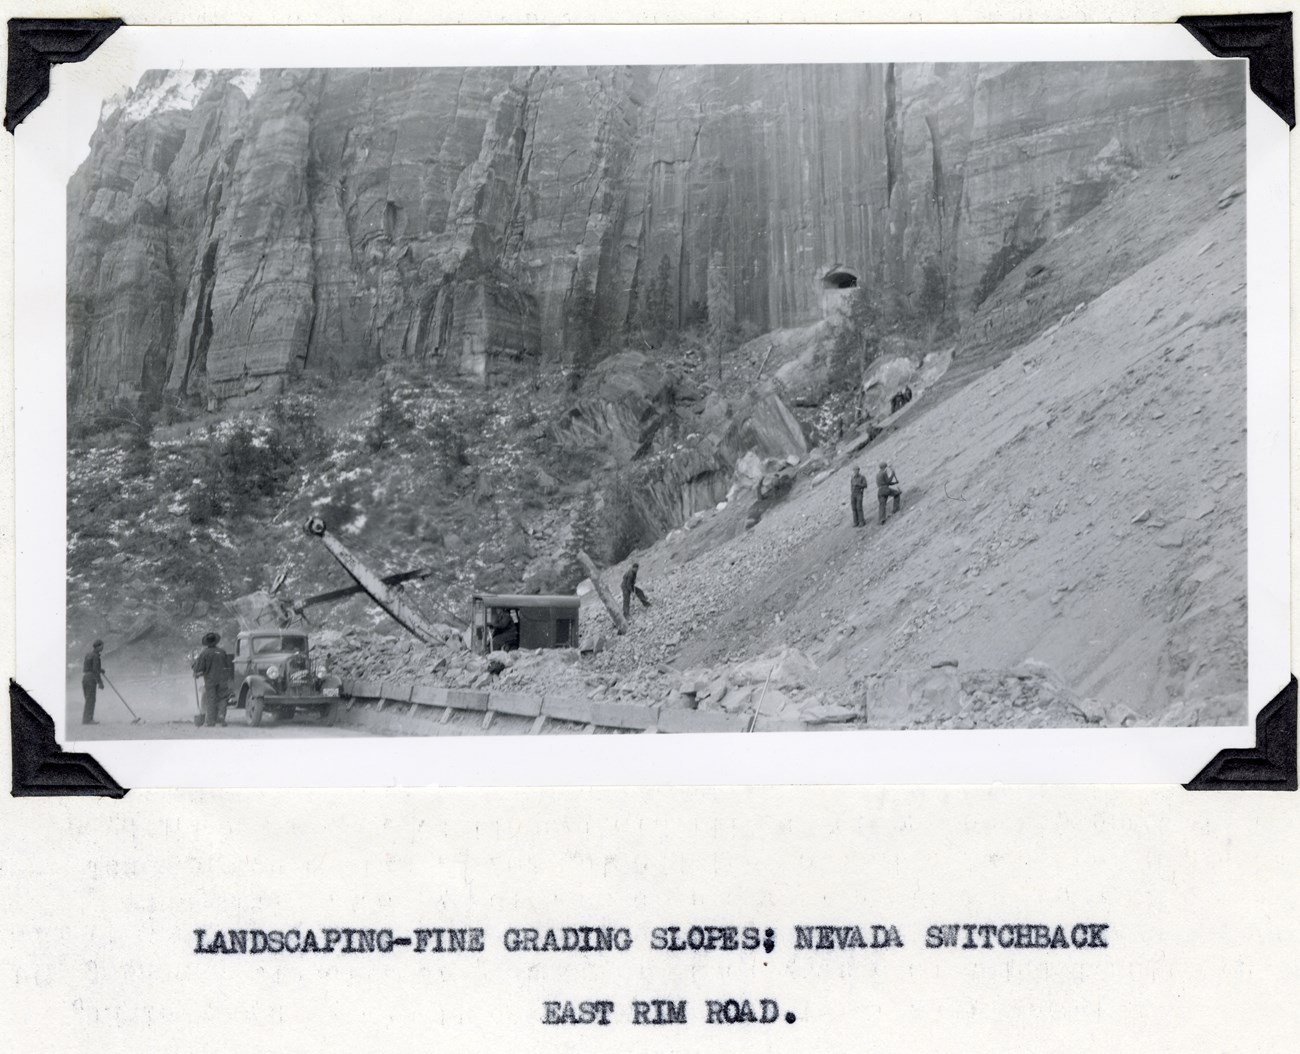 This image from the January 1938 Narrative Report details road work leading up to Mt. Carmel Tunnel